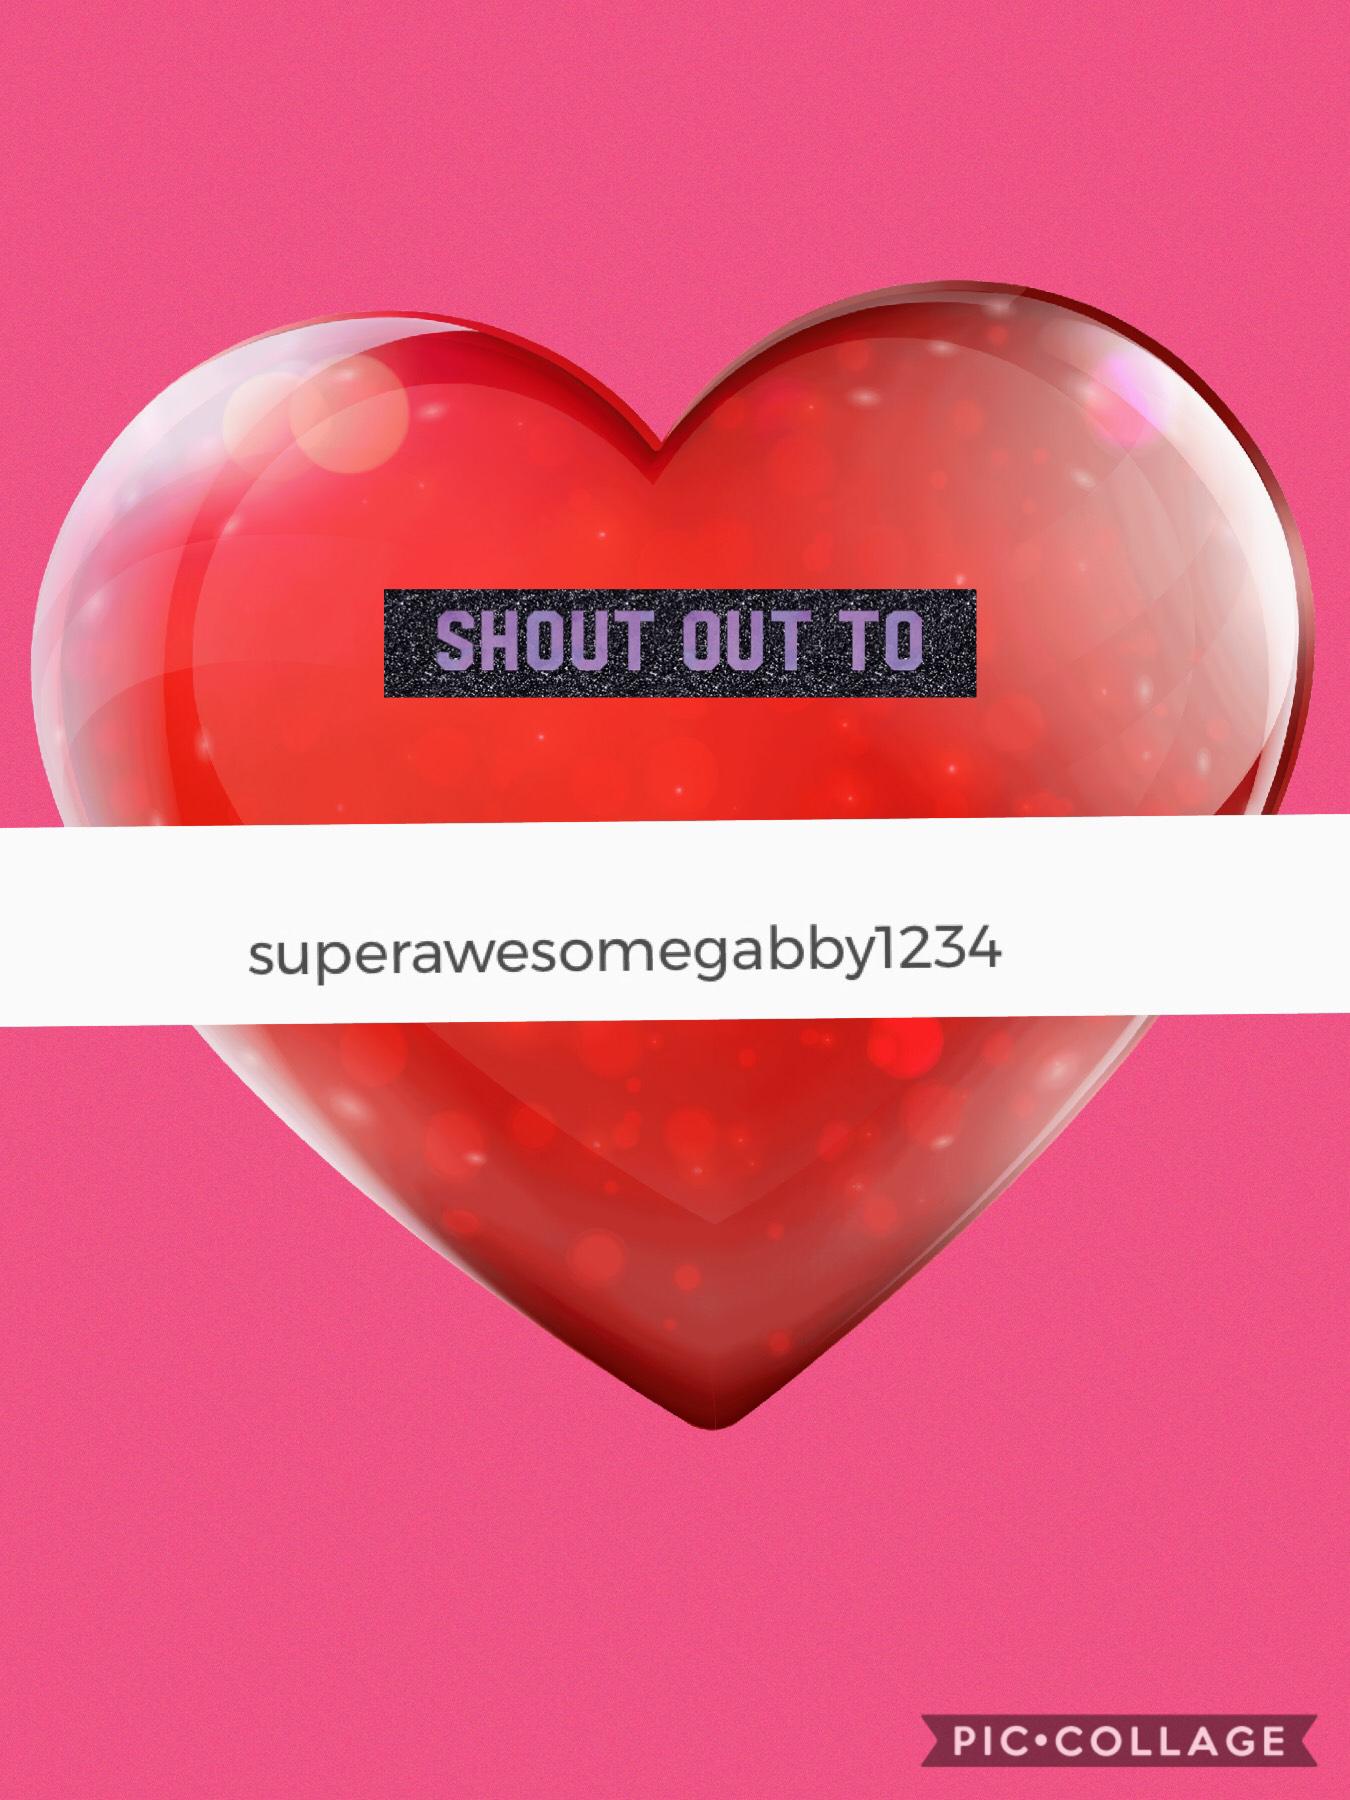 Thx superawesomegabby1234 for being a follower